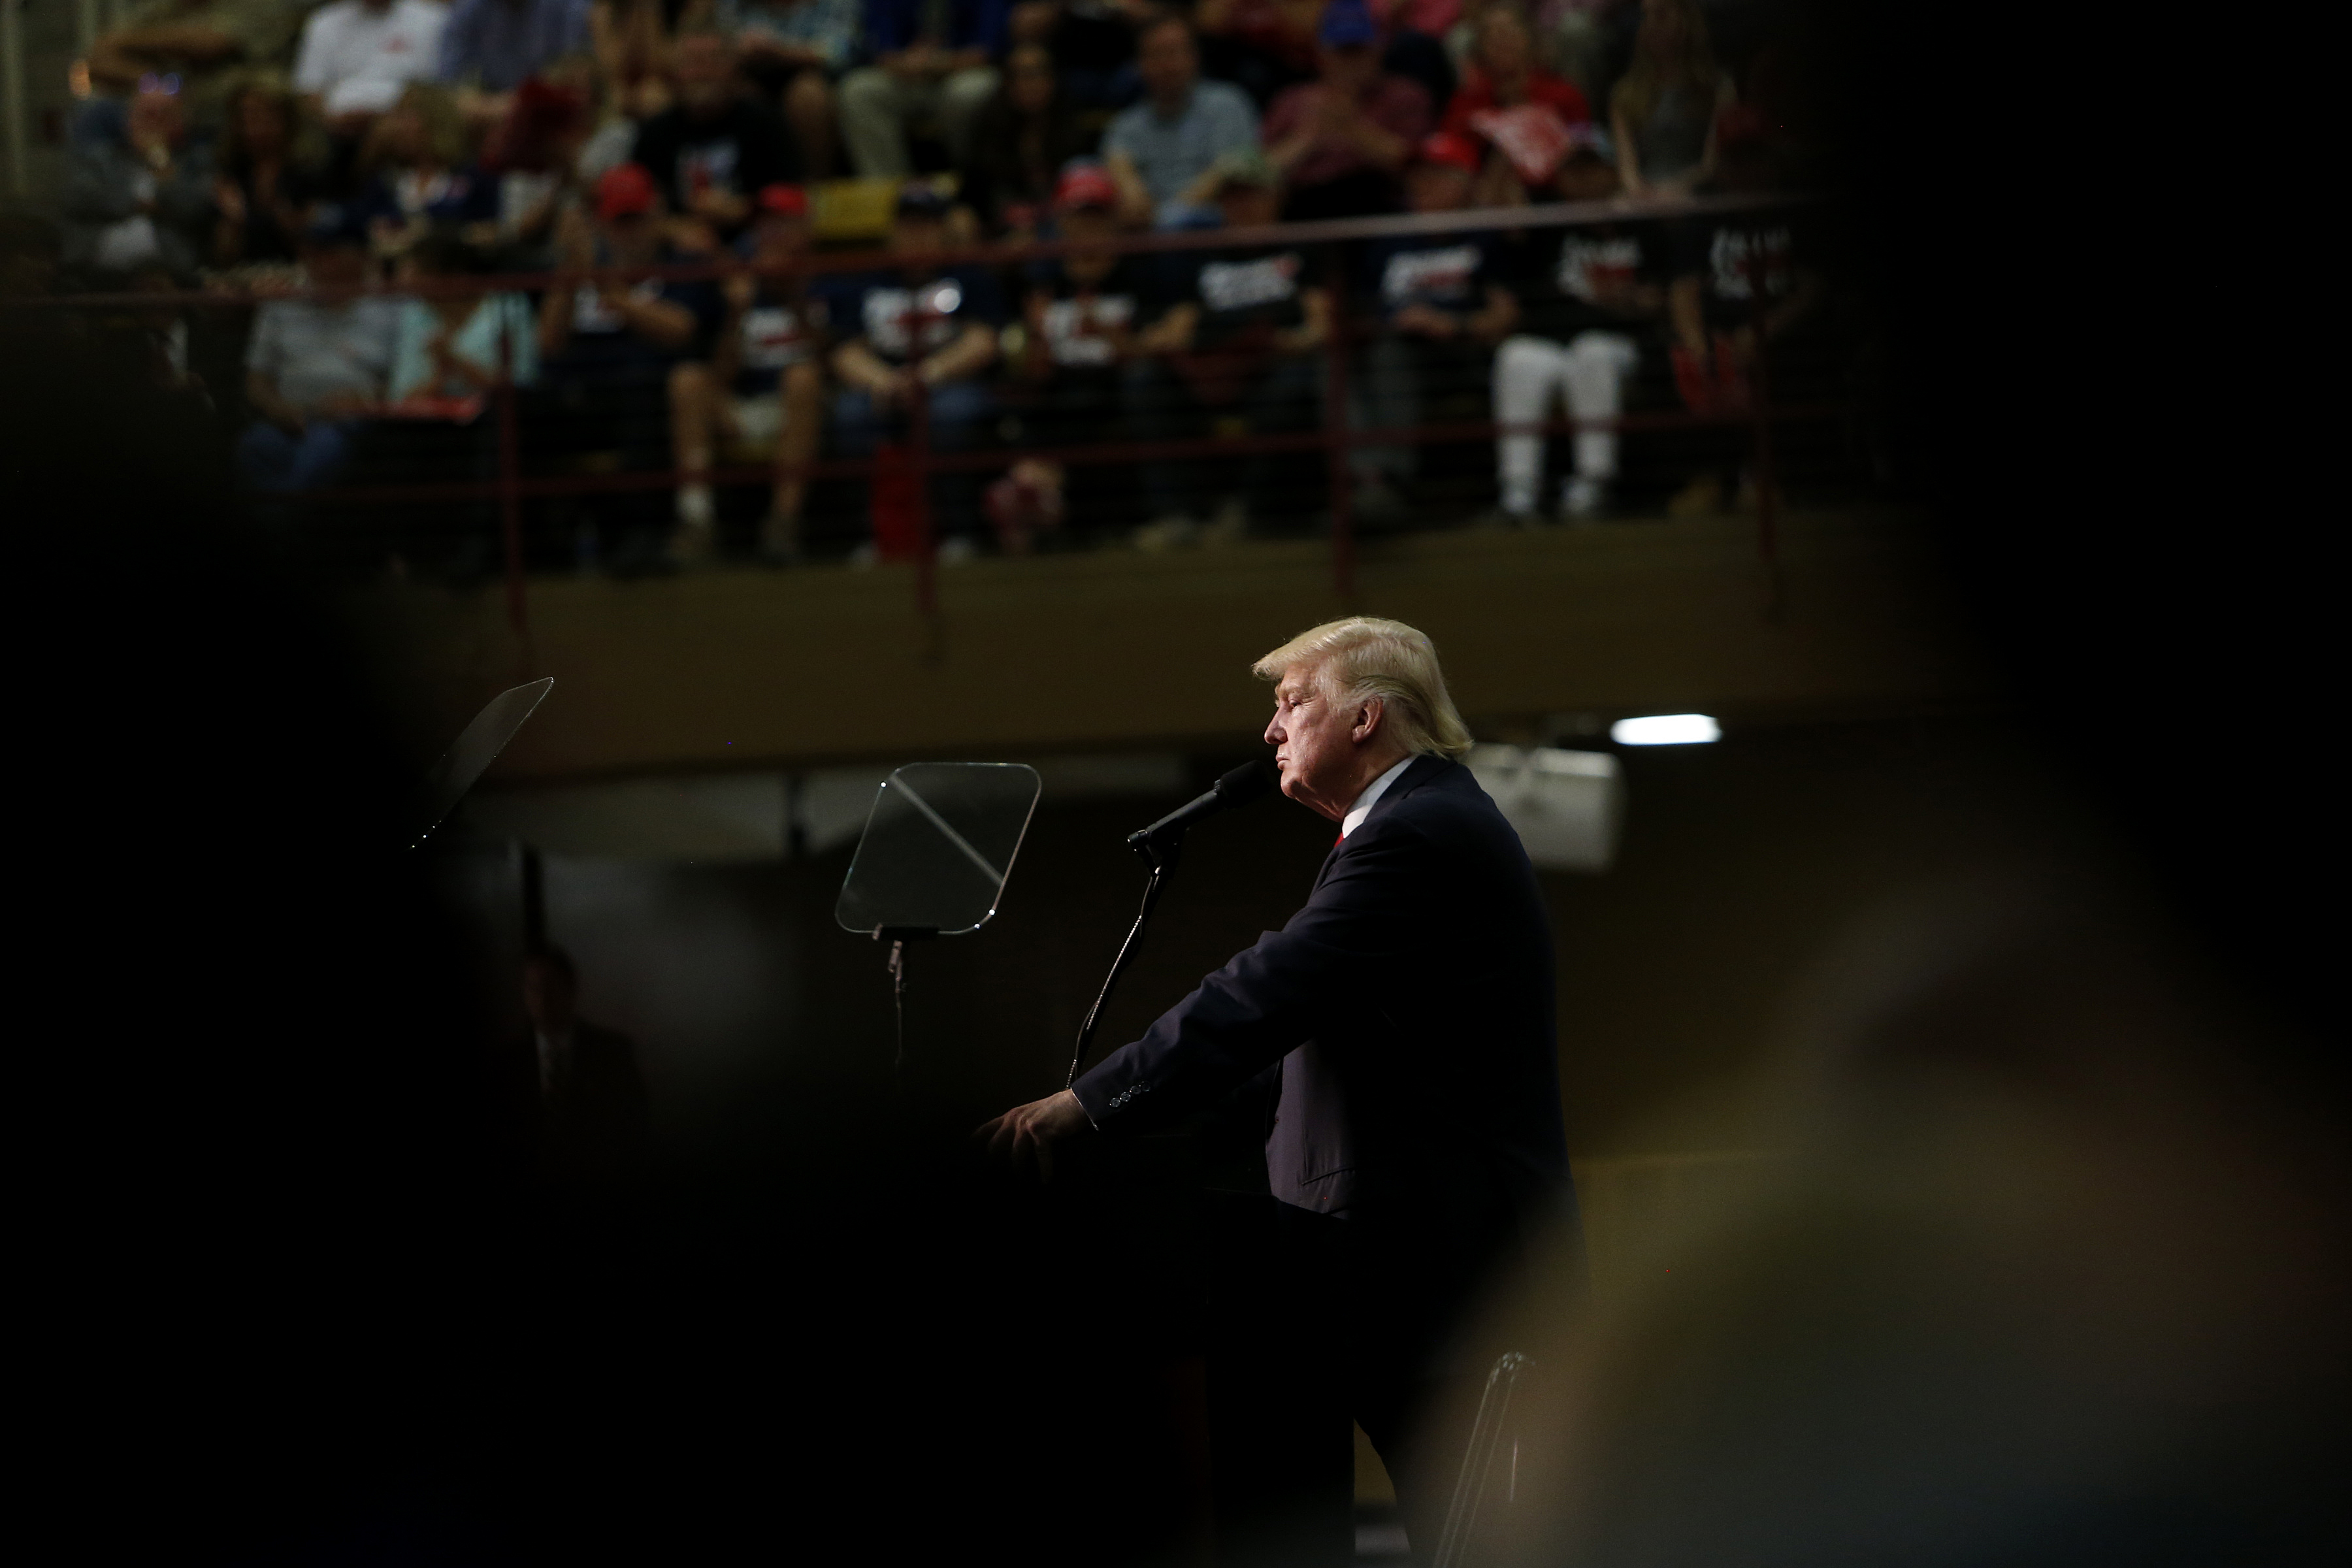 Republican presidential candidate Donald Trump speaks to supporters at a rally at U.S. Cellular Center in Asheville, N.C., on Sept. 12, 2016. (Brian Blanco—Getty Images)